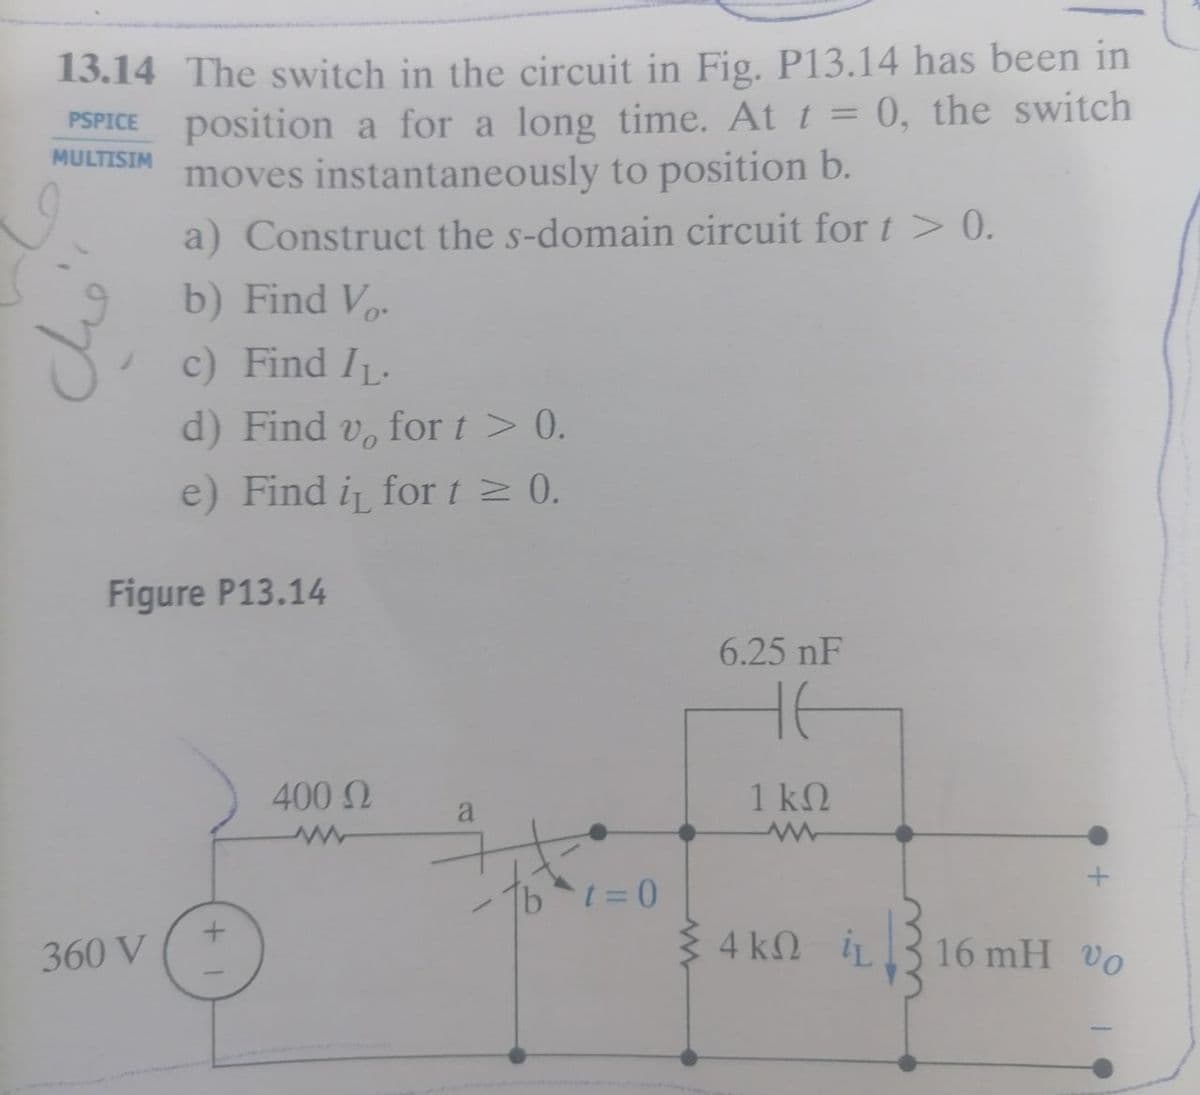 13.14 The switch in the circuit in Fig. P13.14 has been in
position a for a long time. At t = 0, the switch
moves instantaneously to position b.
PSPICE
MULTISIM
a) Construct the s-domain circuit for t > 0.
b) Find Vo.
c) Find IL.
d) Find v, for t > 0.
e) Find i for t > 0.
Figure P13.14
6.25 nF
400 N
1 k2
a
360 V
4 kN iL
16 mH Vo
